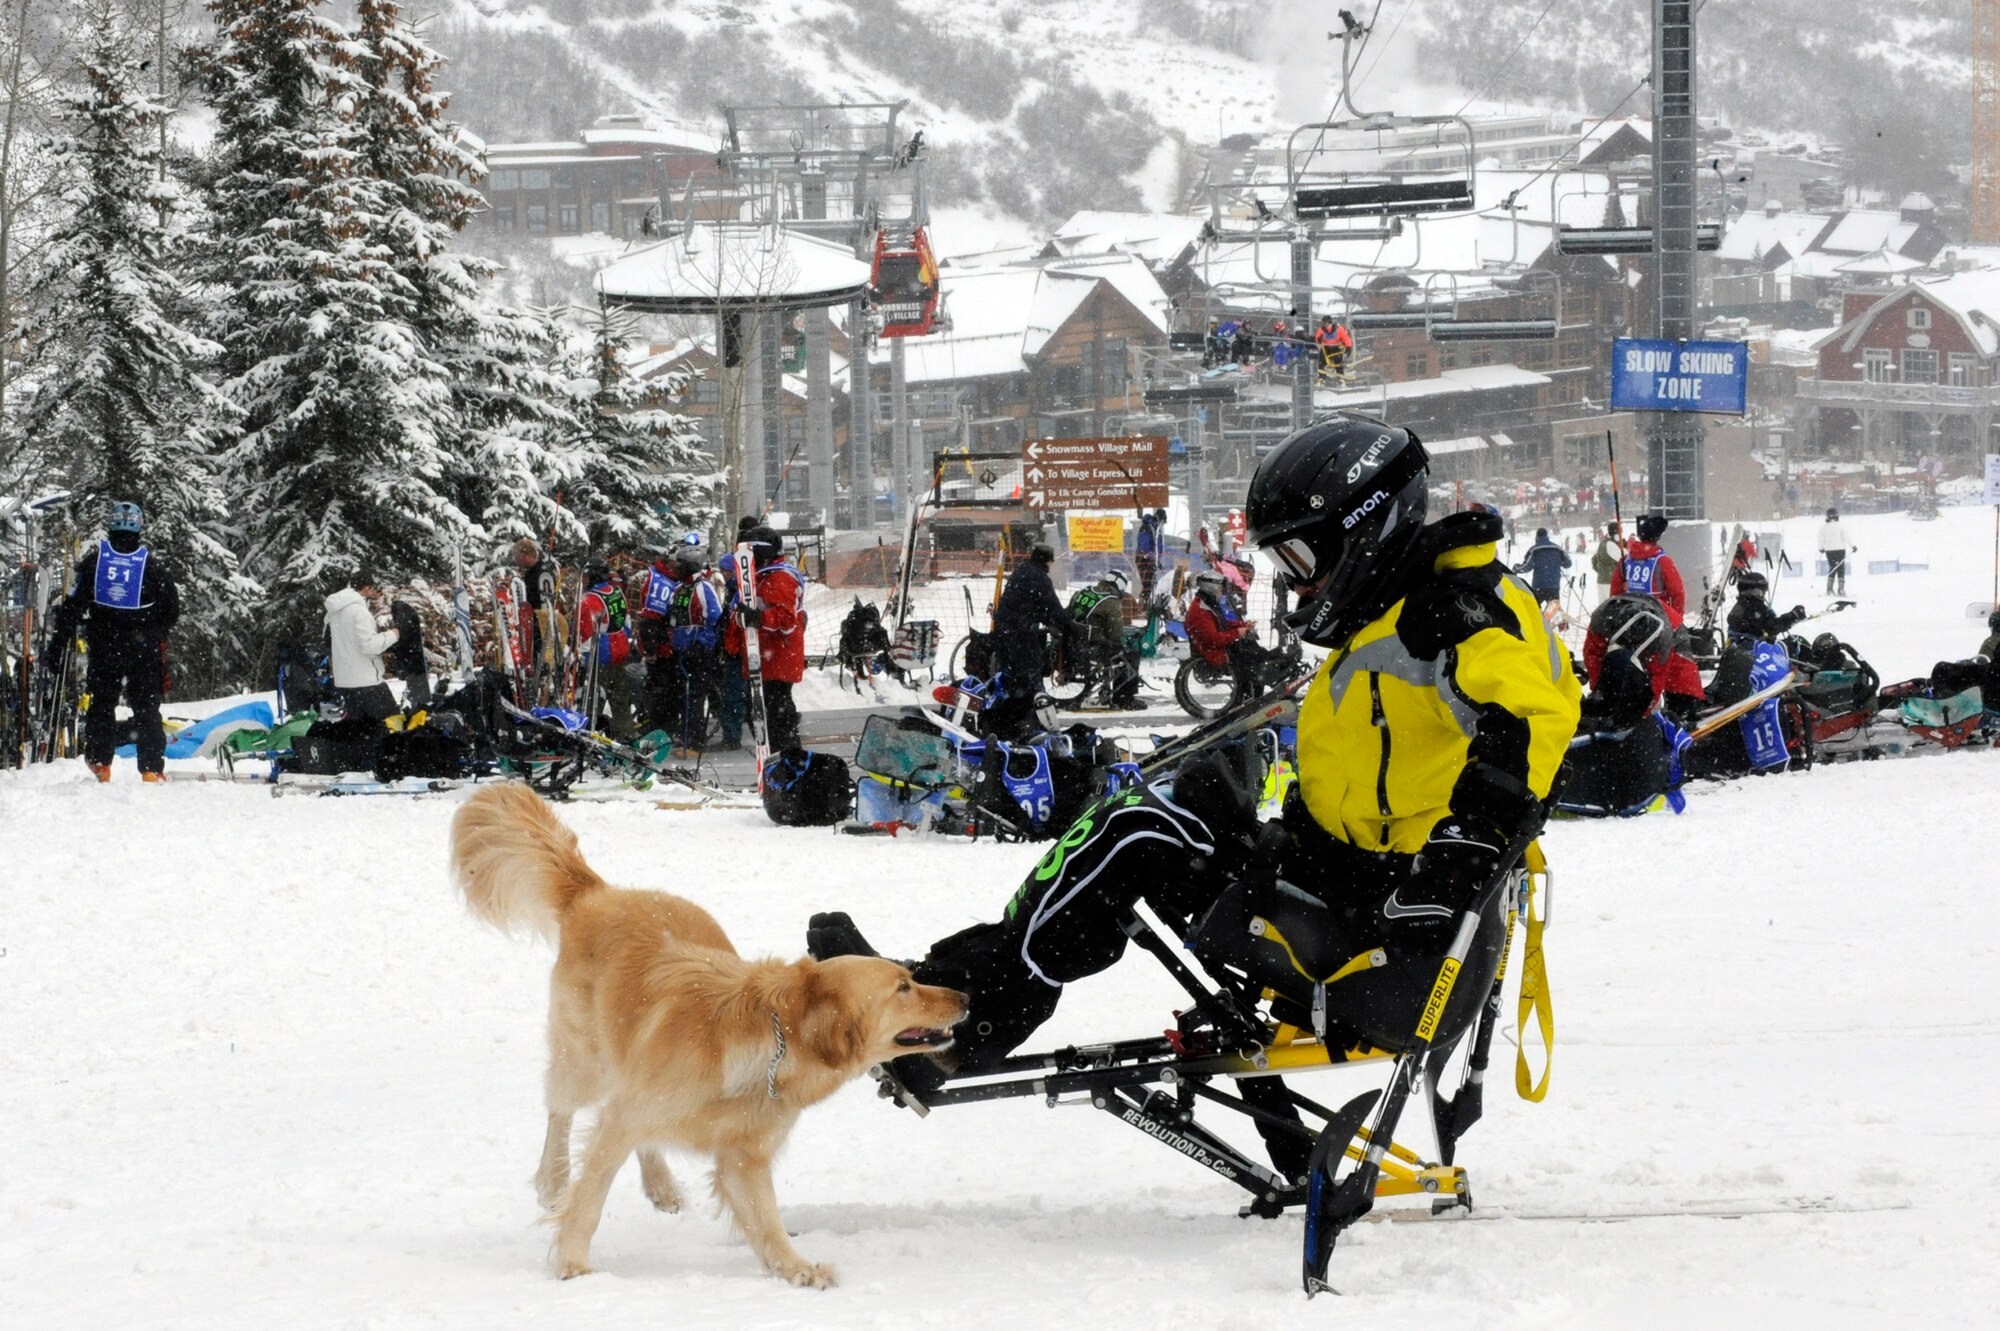 Russell Wolfe waits his turn to mono-ski with the help of an instructor while his dog, Noelle, keeps him company during the 23rd National Disabled Veterans Winter Sports Clinic held March 30 at the Snowmass Village, Colo. Mr. Wolfe is prior Army and is from Widnoon, Penn. (U.S. Air Force photo/Staff Sgt. Desiree N. Palacios)